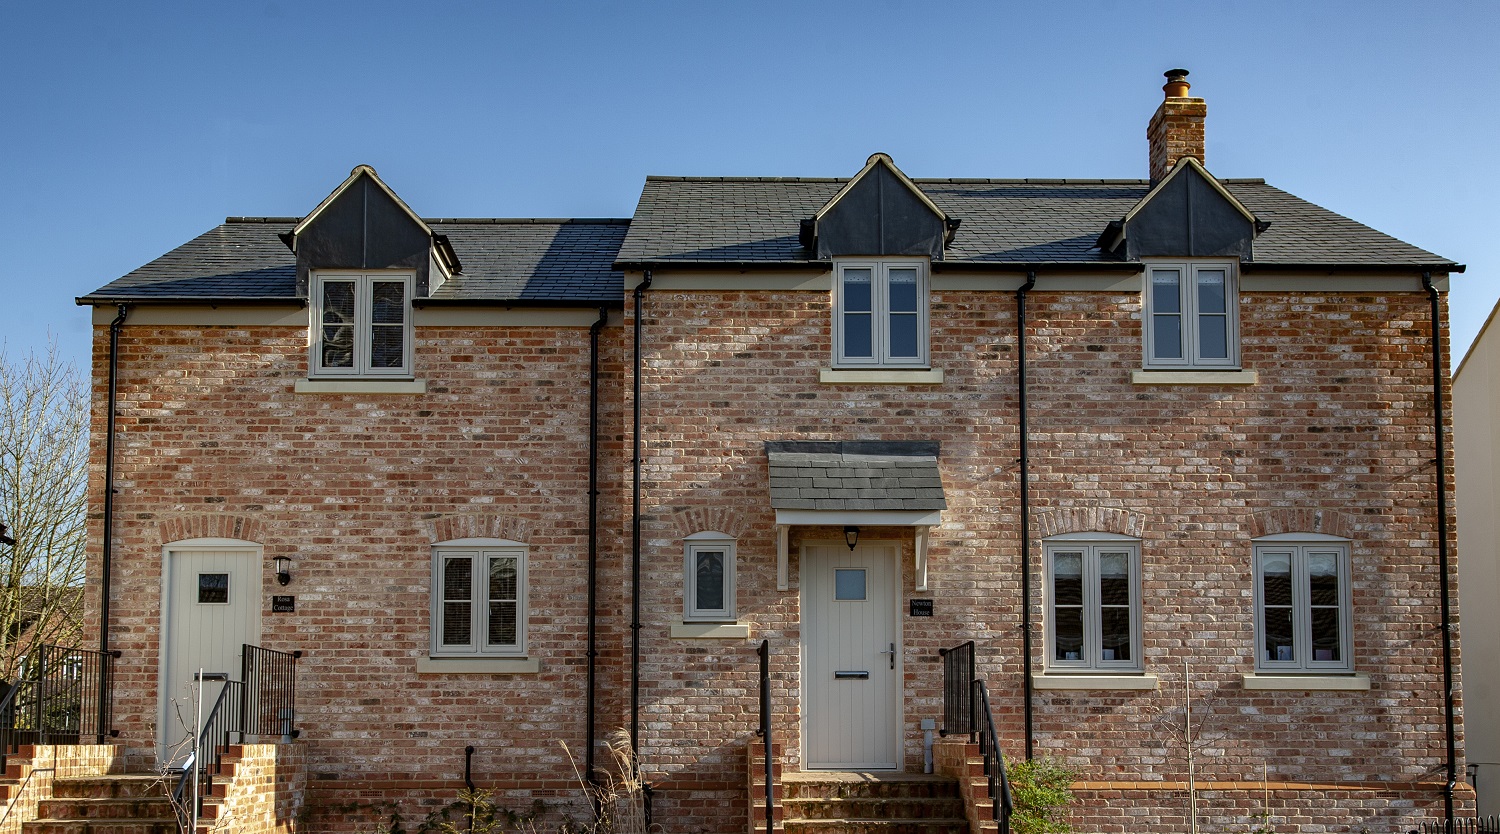 West Port Timber Windows and Timber Doors in a new residential property